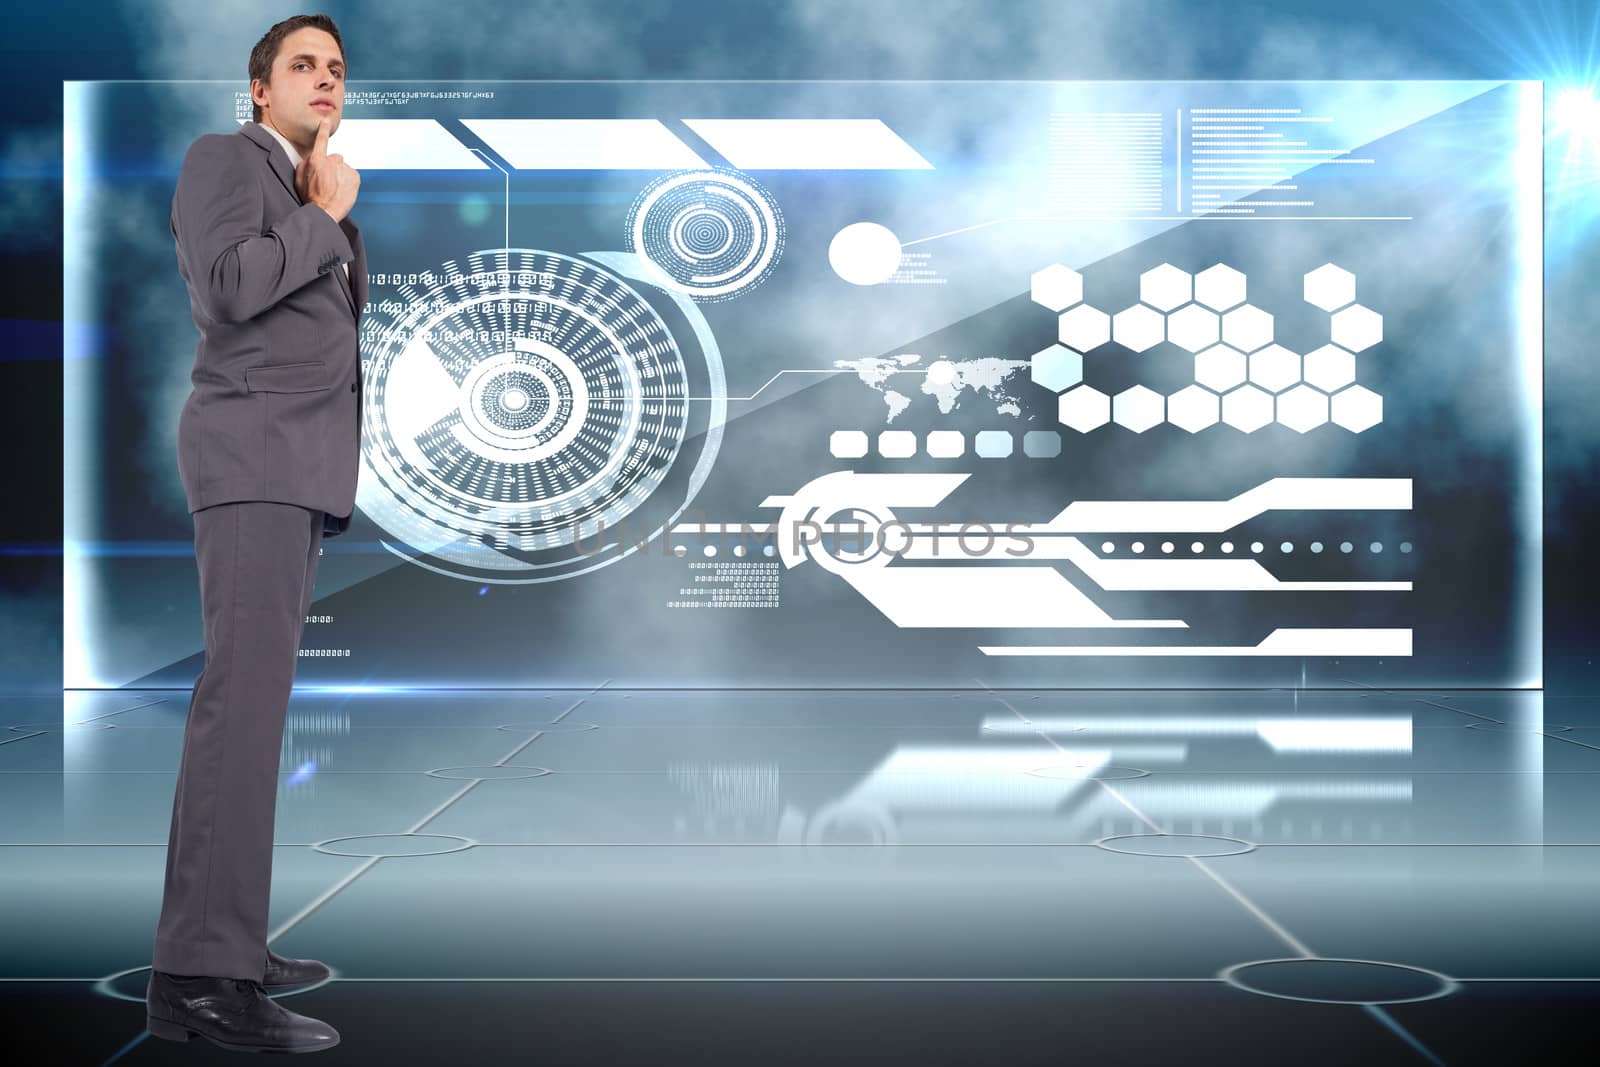 Thinking businessman with hand on chin against futuristic technology interface